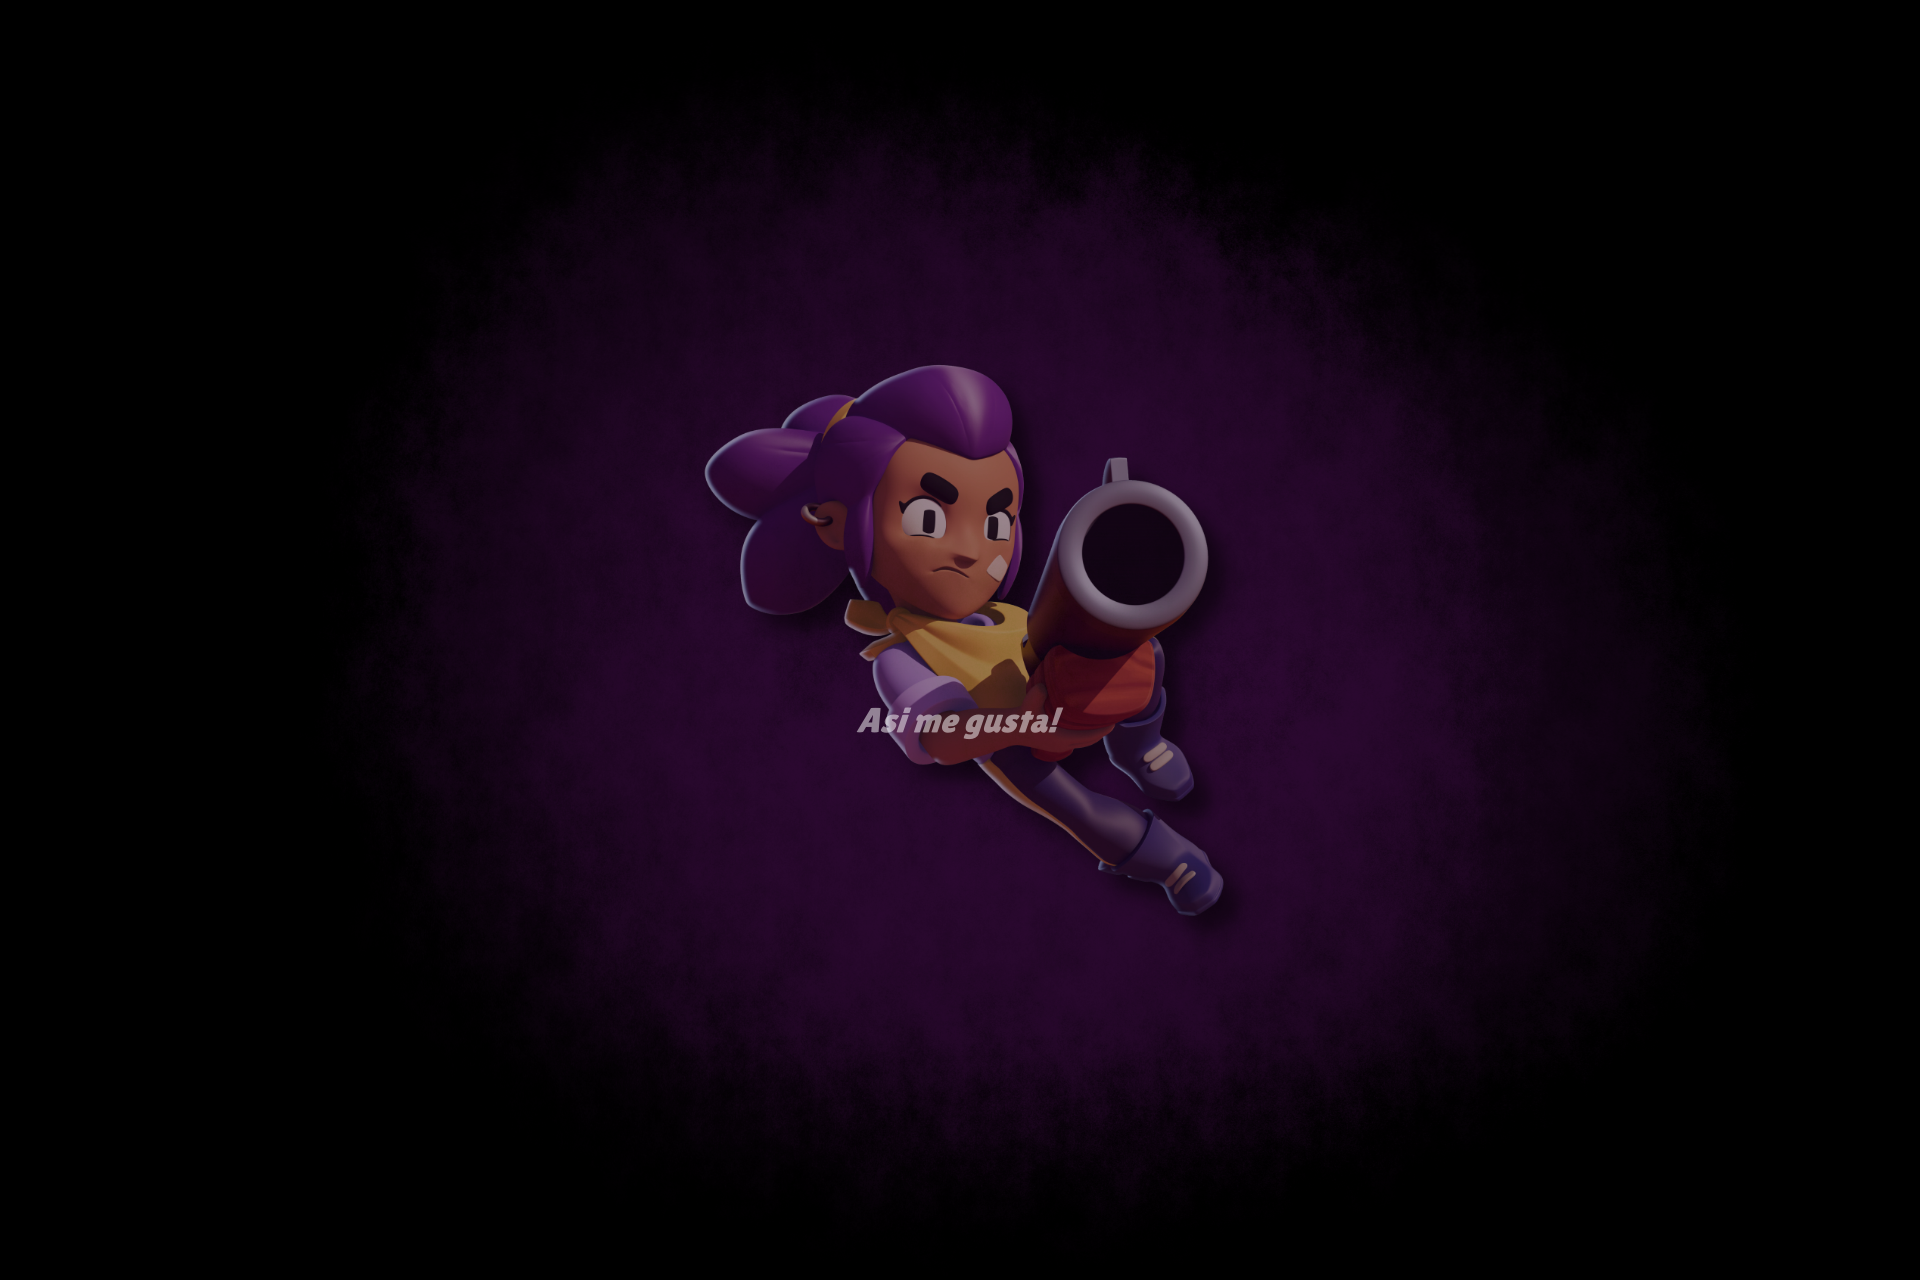 Shelly wallpaper. Hope you guys like this!